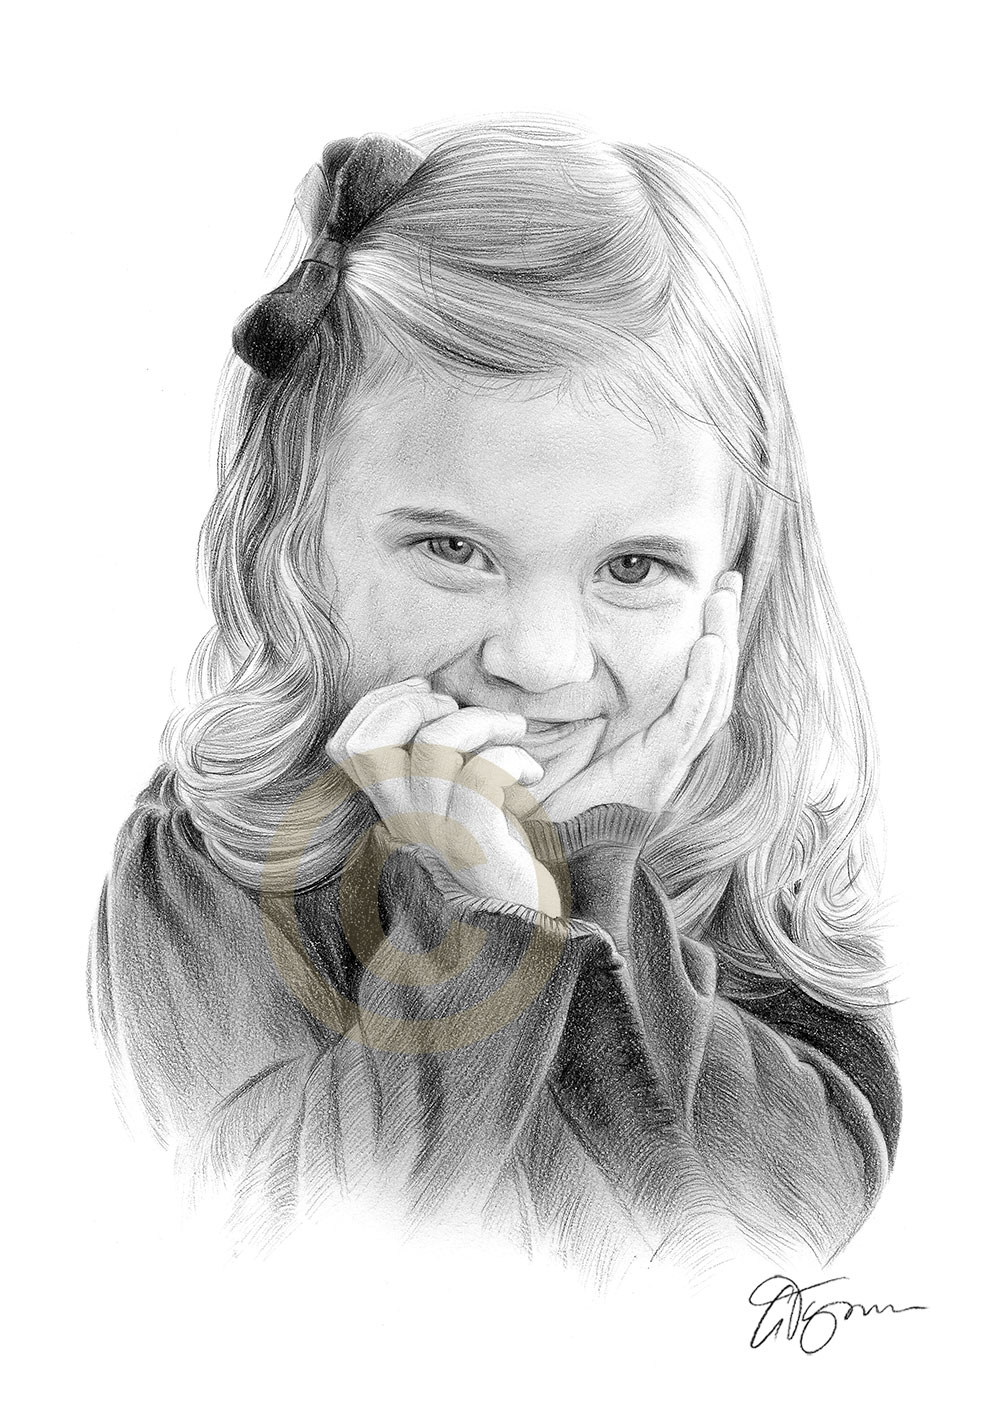 Pencil drawing commission of a young girl by artist Gary Tymon